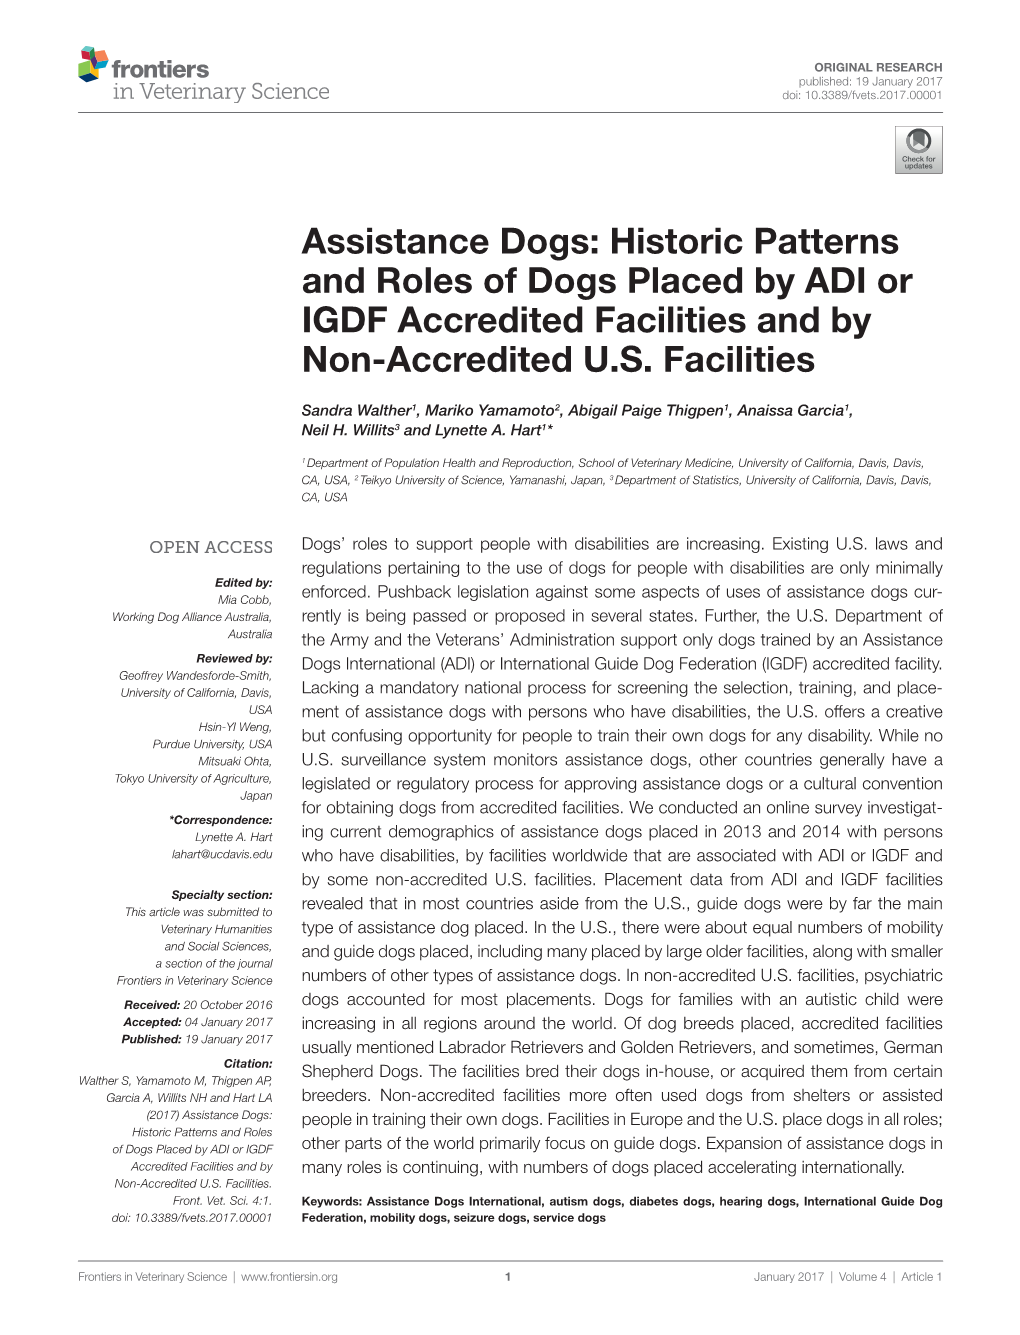 Assistance Dogs: Historic Patterns and Roles of Dogs Placed by Adi Or Igdf Accredited Facilities and by Non-Accredited U.S